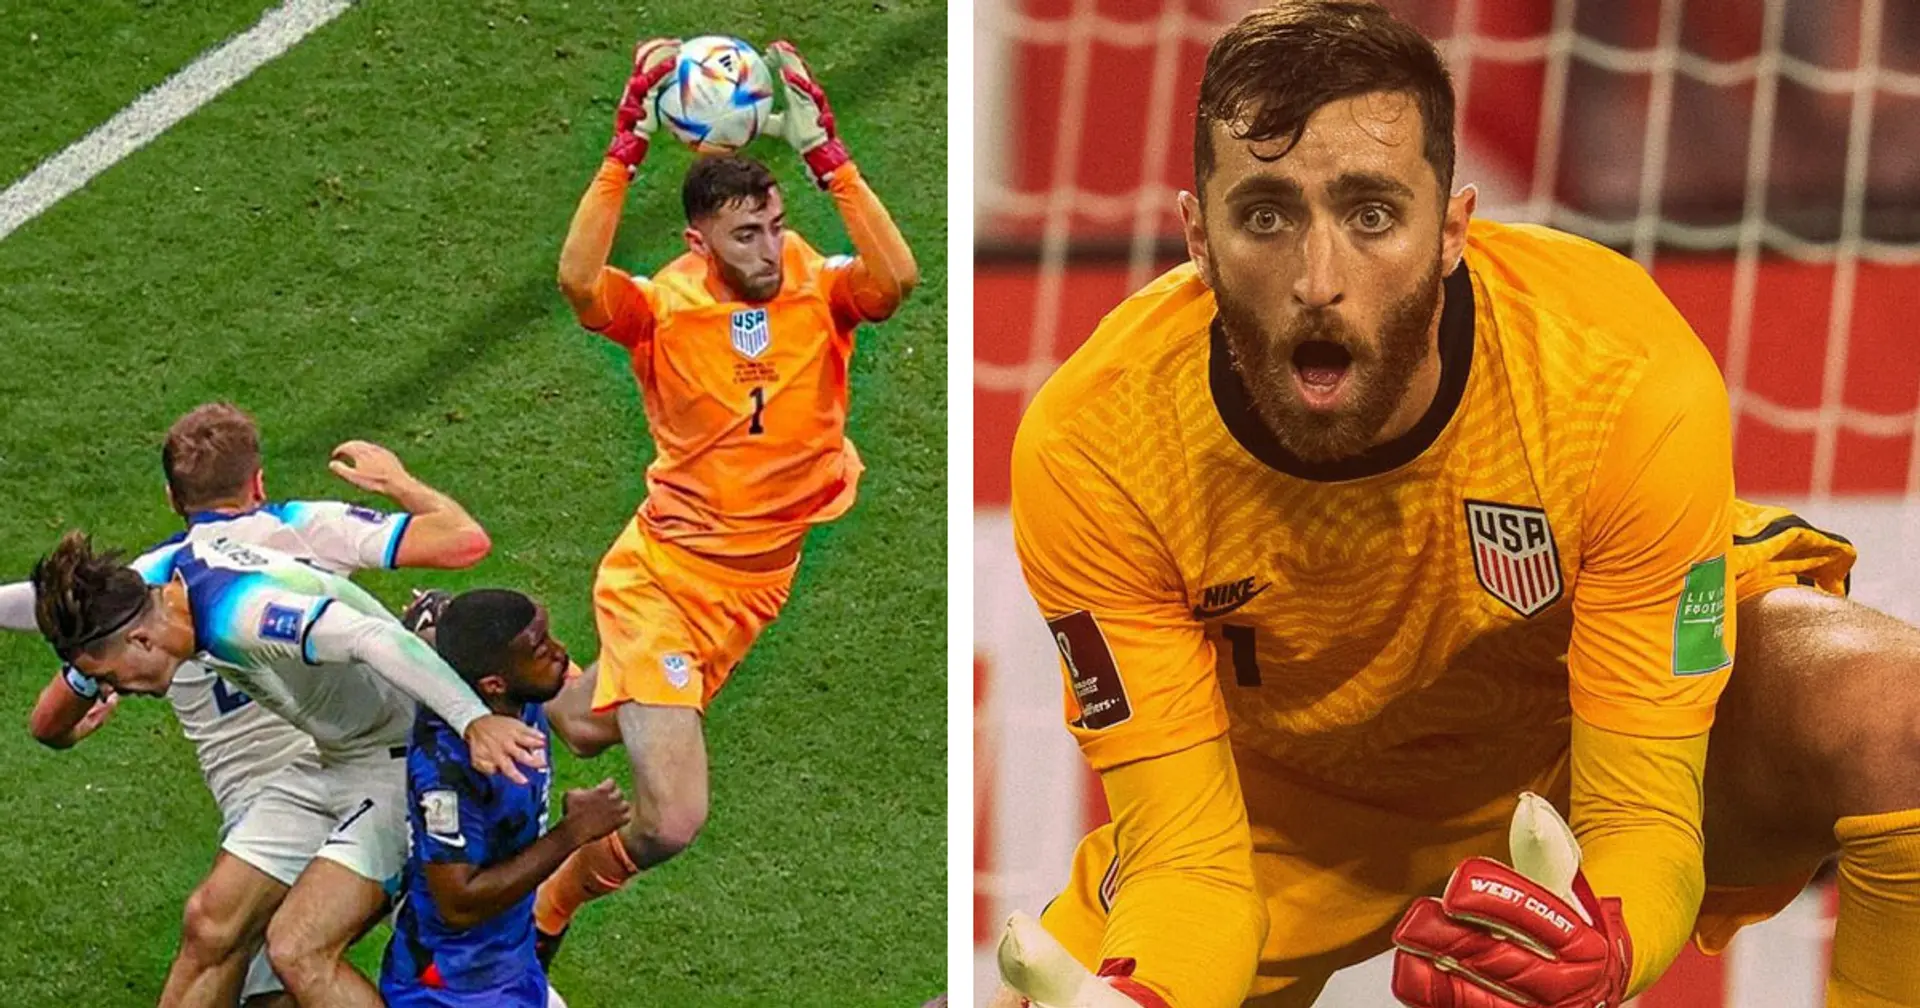 'Might just be the third best GK in the world': Matt Turner earns widespread praise for heroics in England draw